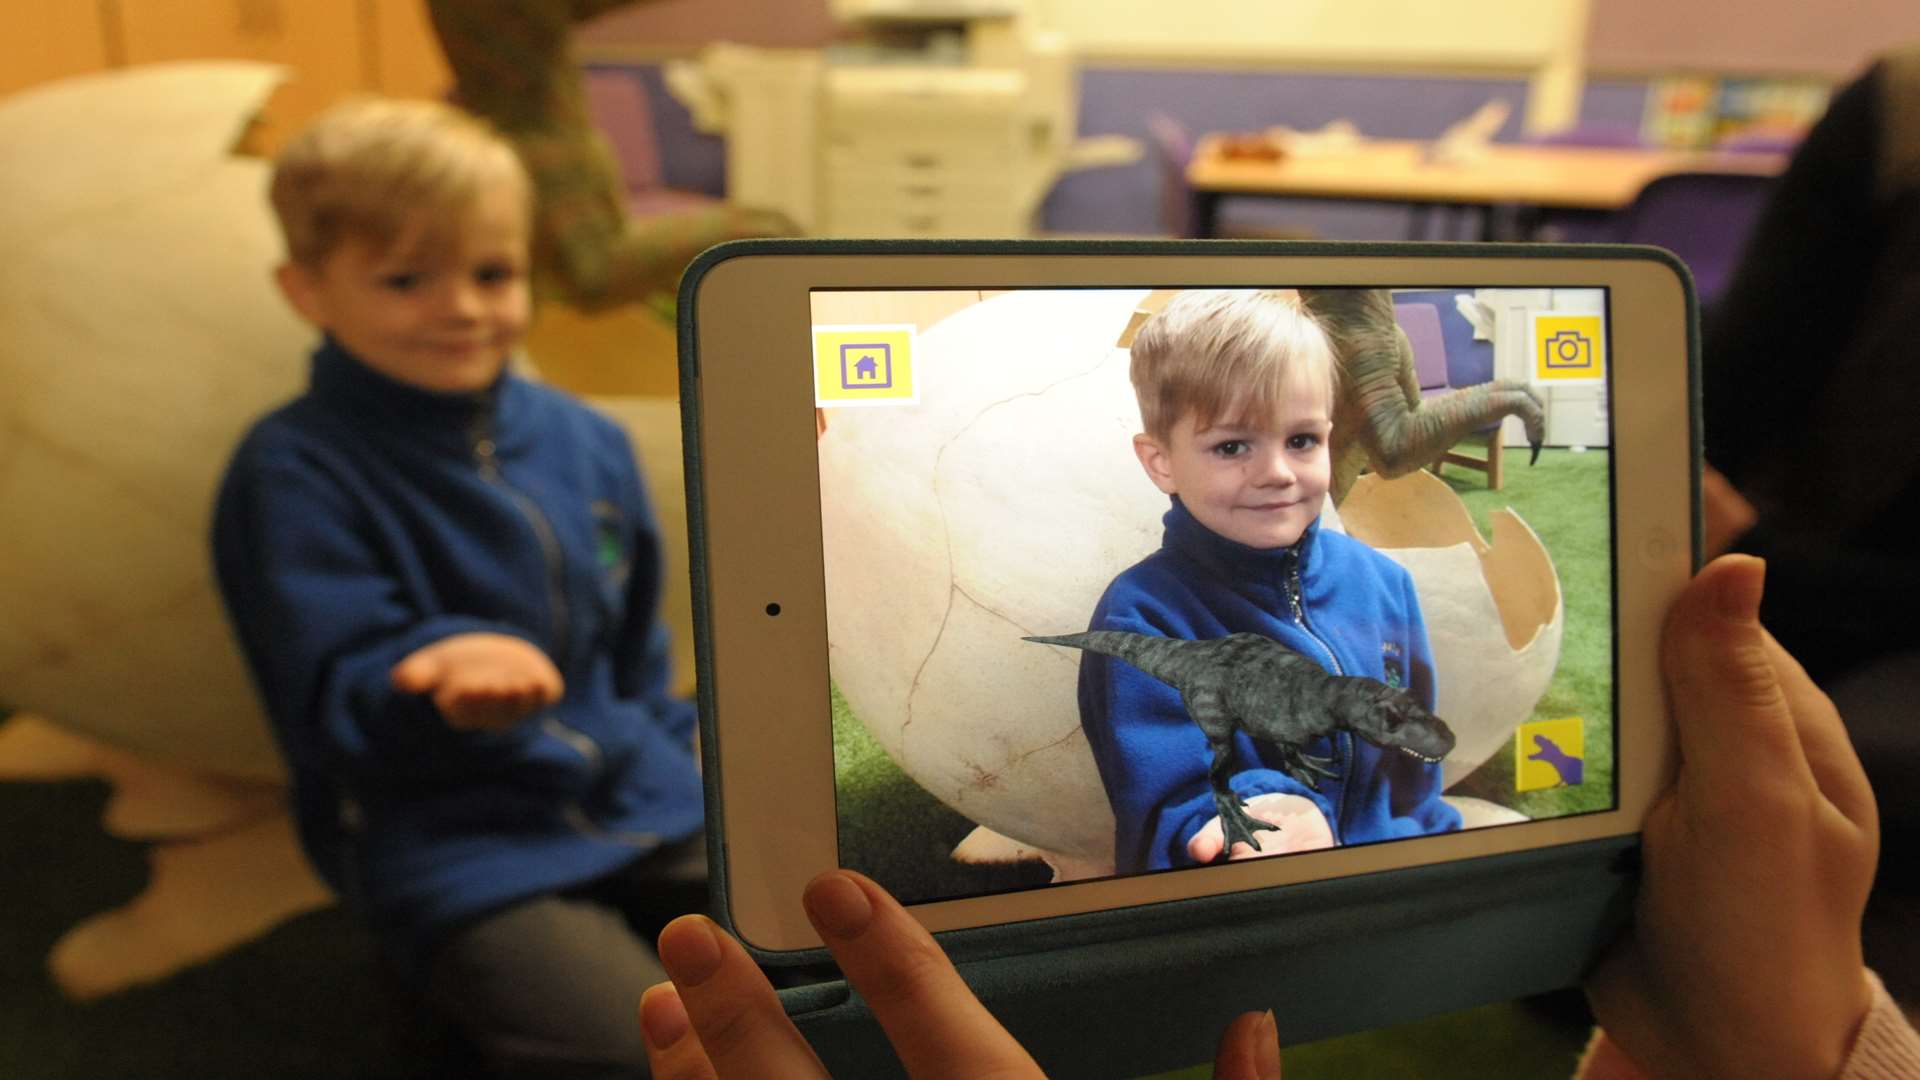 George being shown the KM i3d App which animates dinosaurs on an phone or tablet at Swingate Primary School, Sultan Road, Lordswood